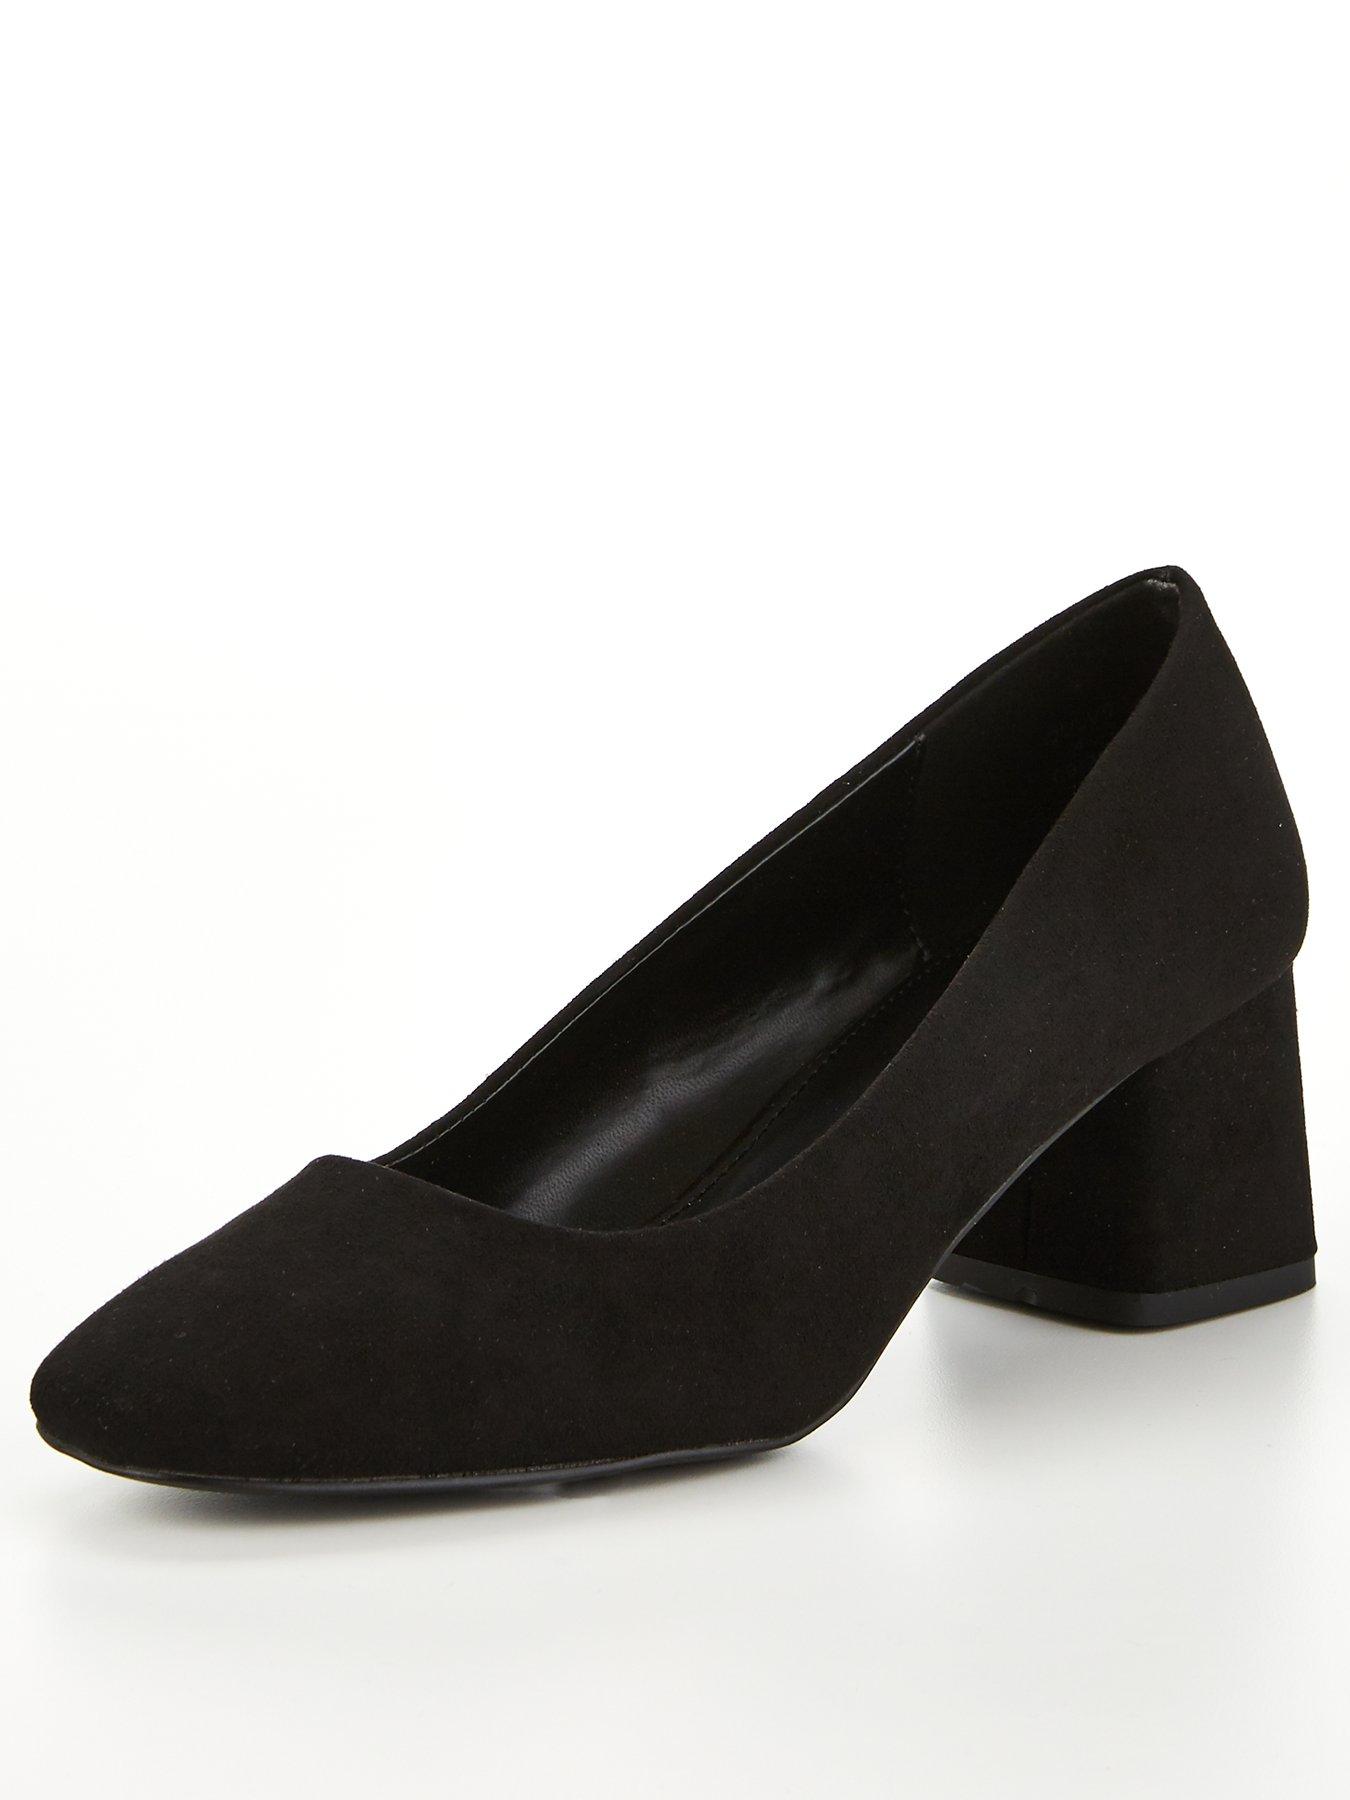 V by Very Wide Fit Square Toe Low Block Court Shoe - Black 